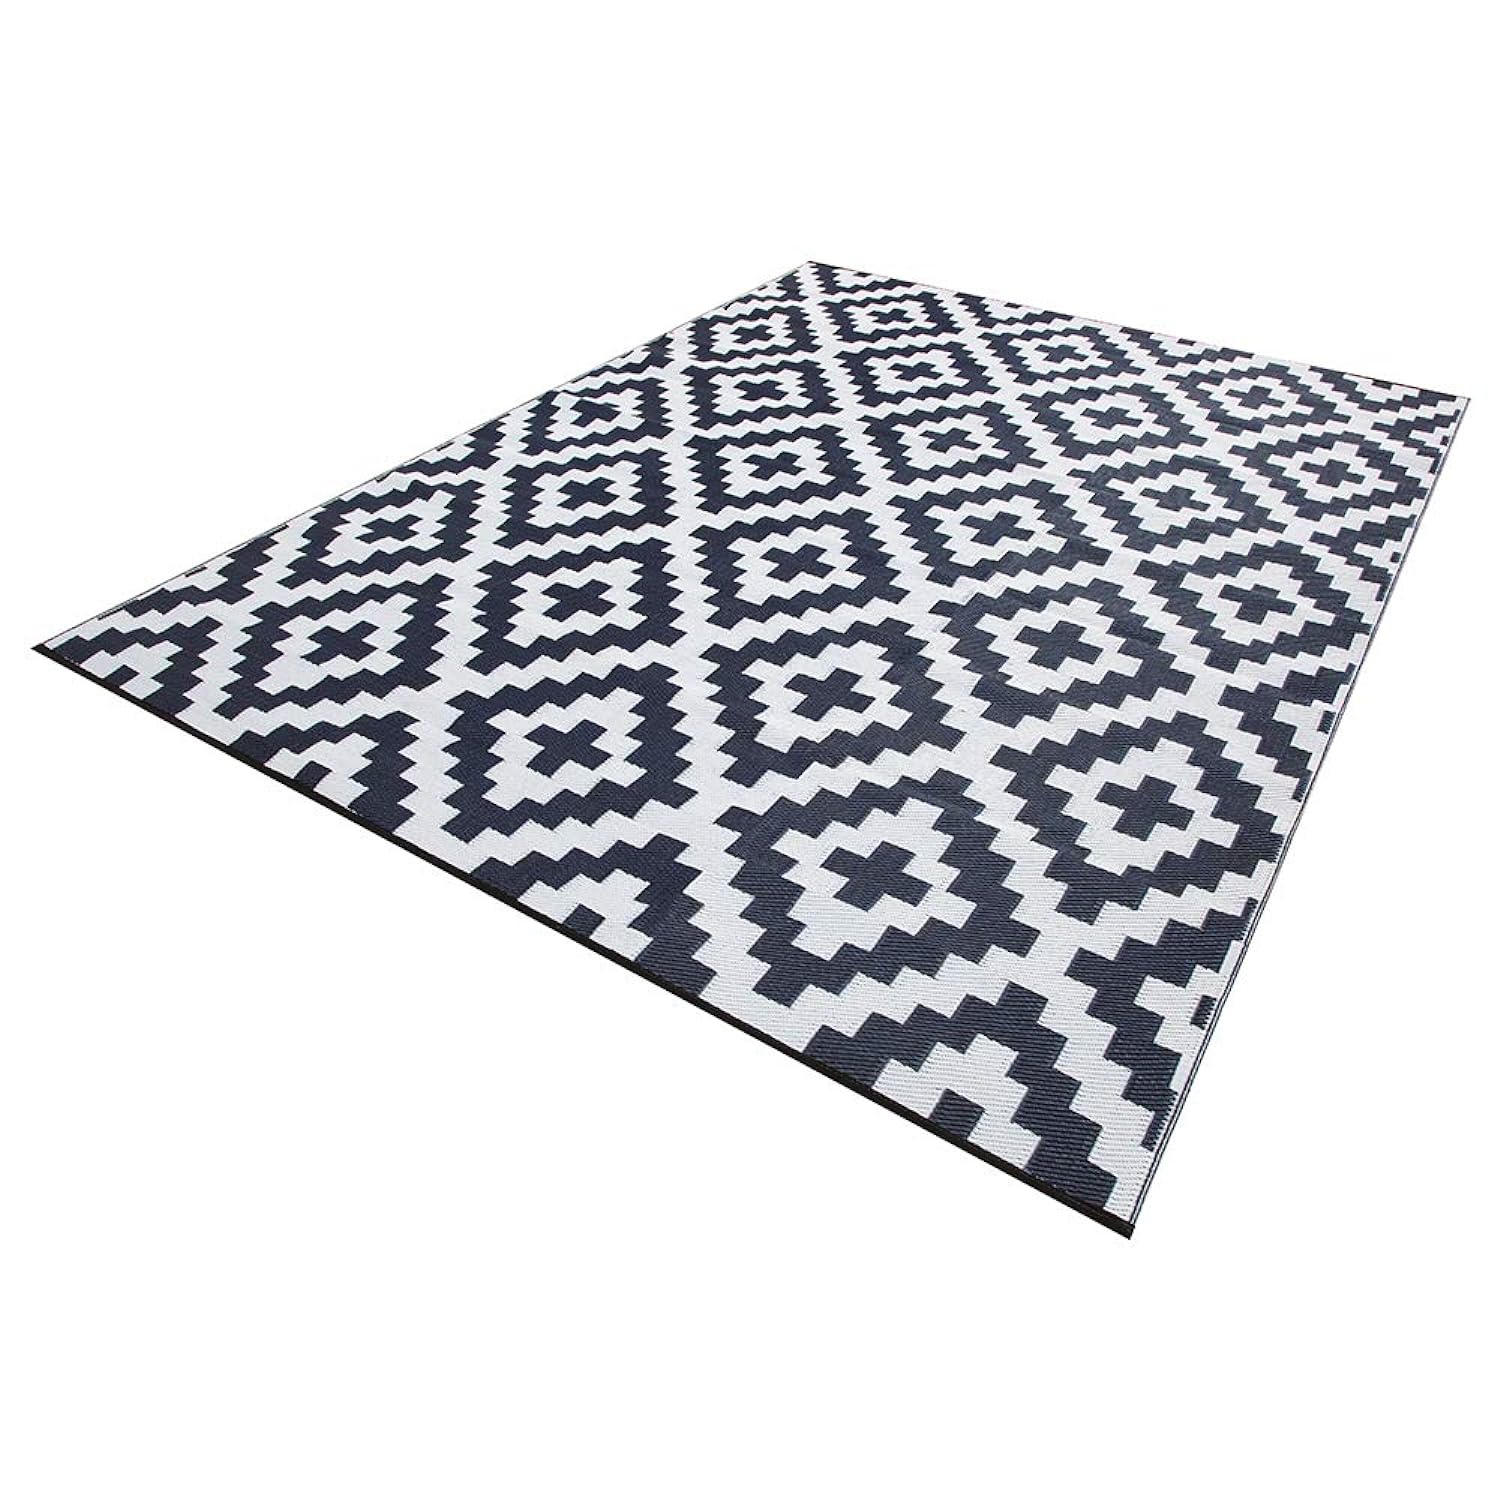 TKM Home Reversible Outdoor/Indoor Plastic Rug,Easy To Clean And Fold,Perfect For Garden, Patio, Picnic, Decking-(Blue,8X10Ft)